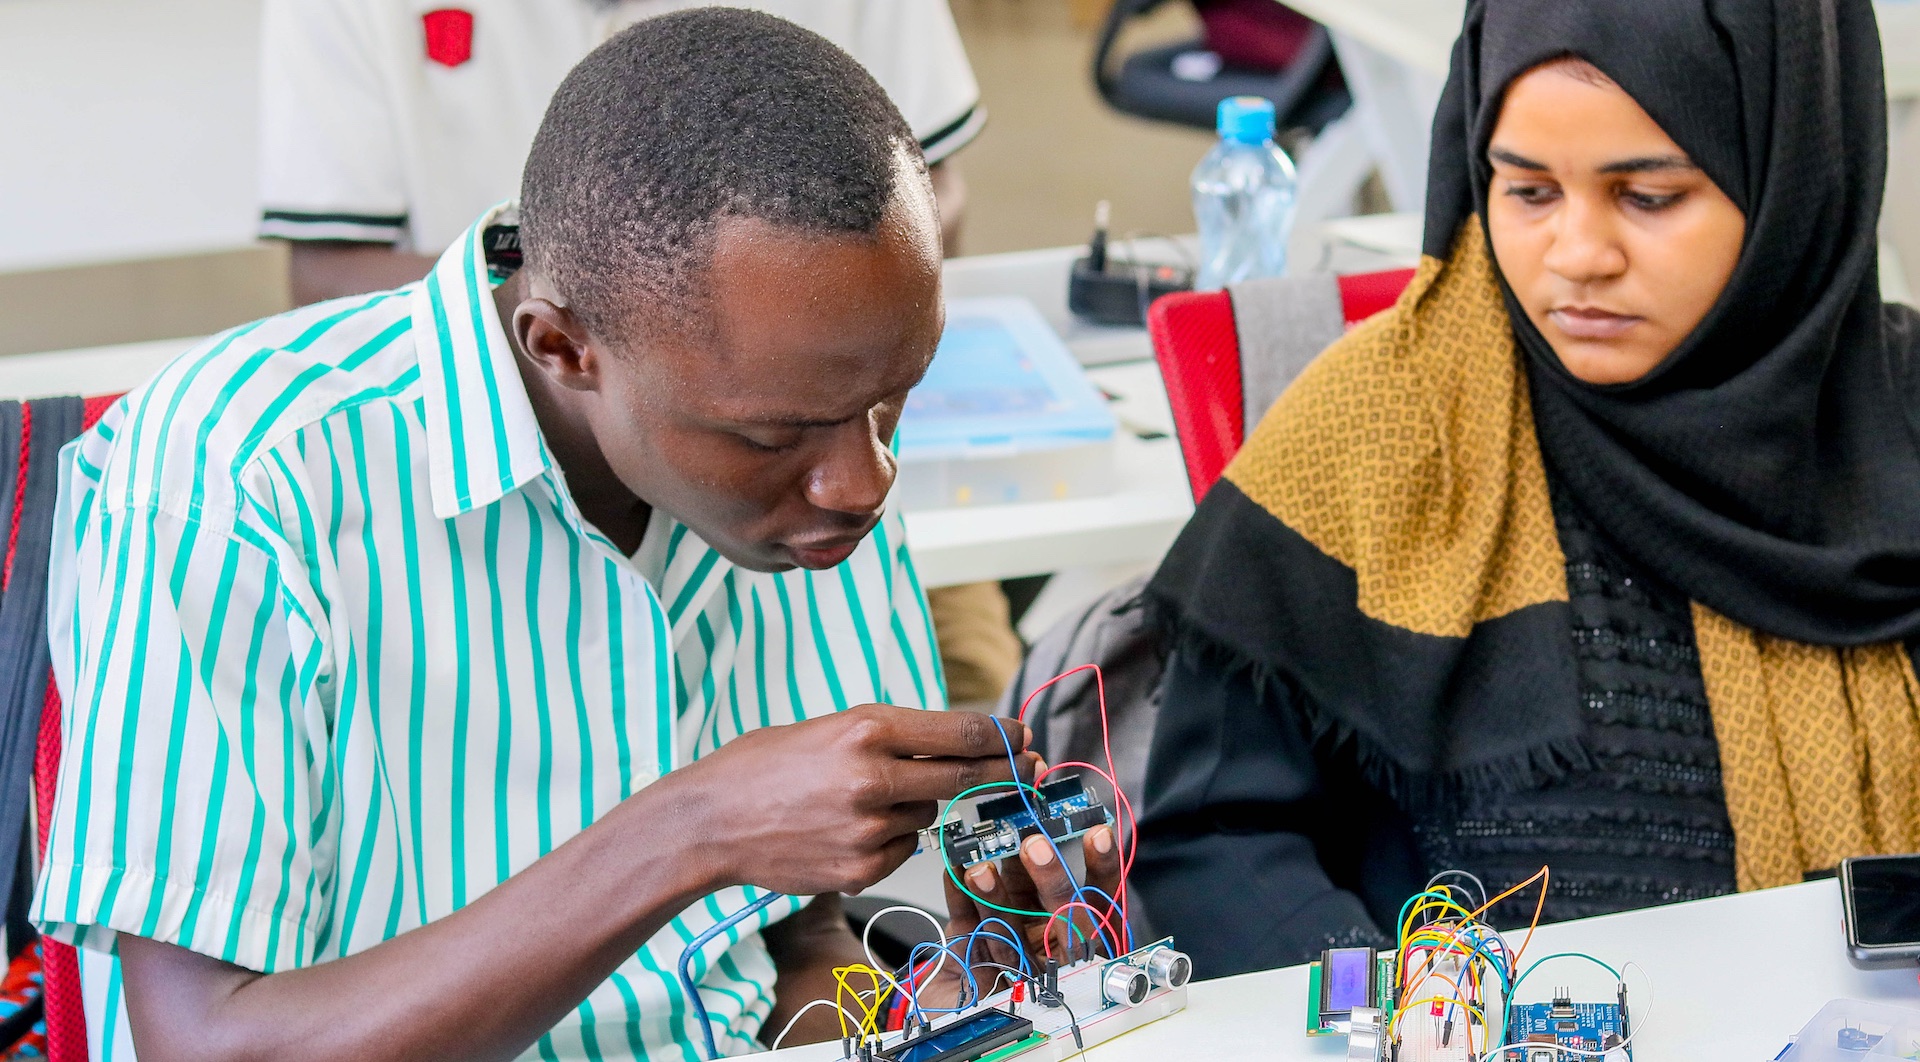 Maker expertise shared during a workshop in the I.O.Me Innovation Labs, a humanitarian fabrication lab in Kenya and one of the sites currently testing the People and Skills Specification.